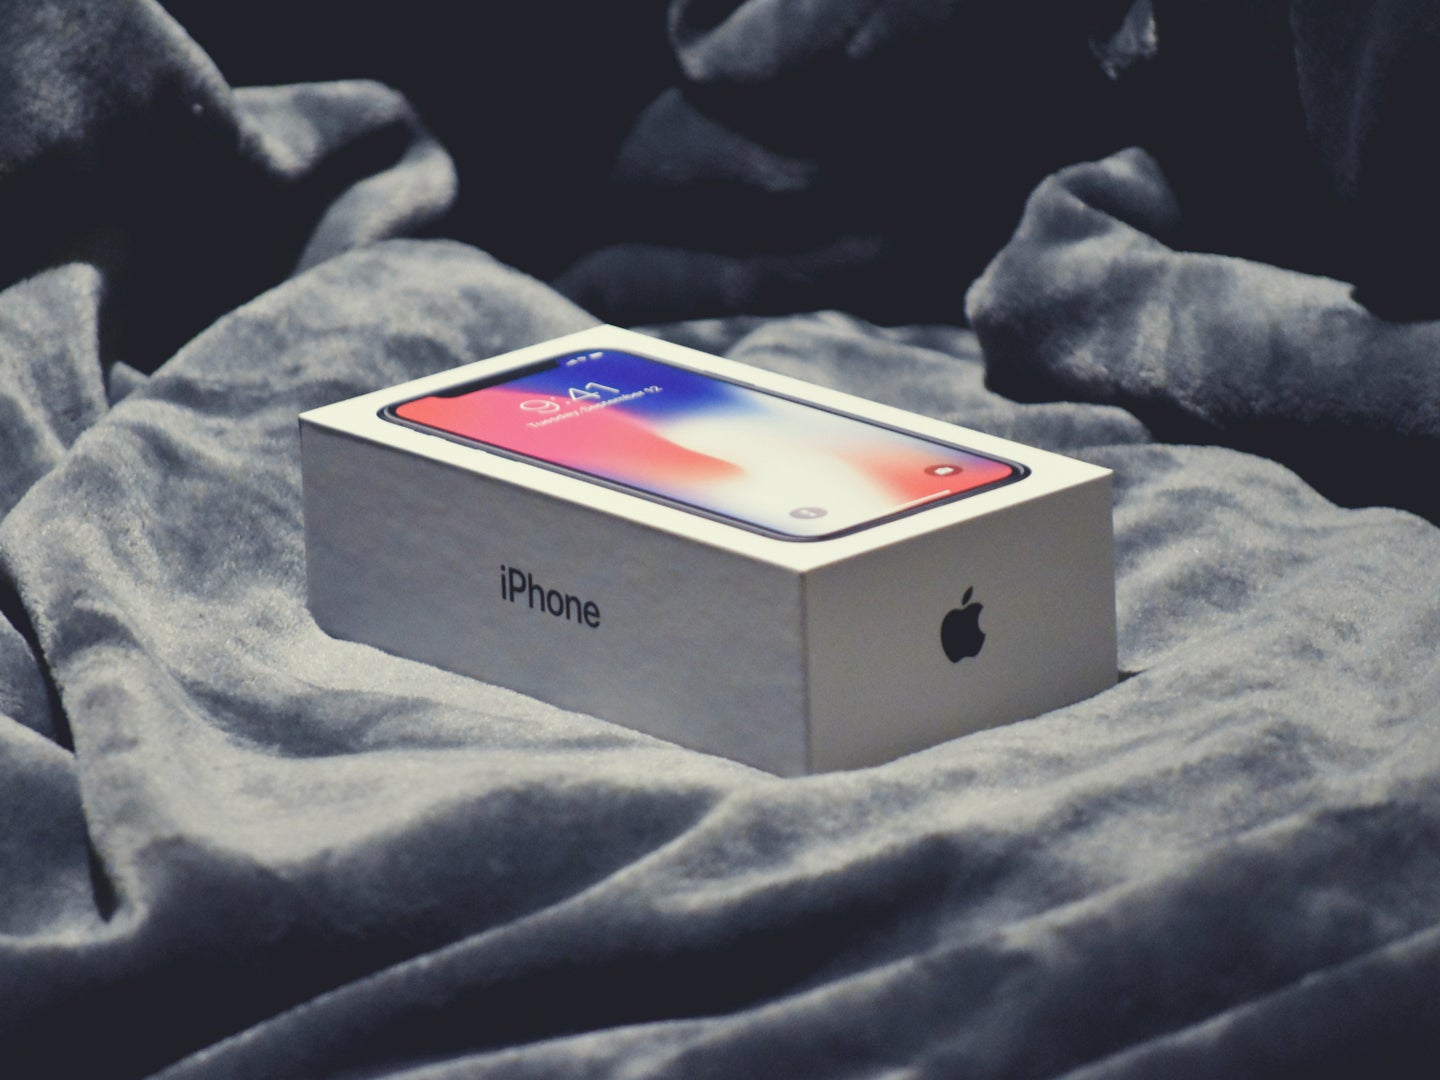 An Apple iPhone in a box, on a lush bed of soft gray blankets.